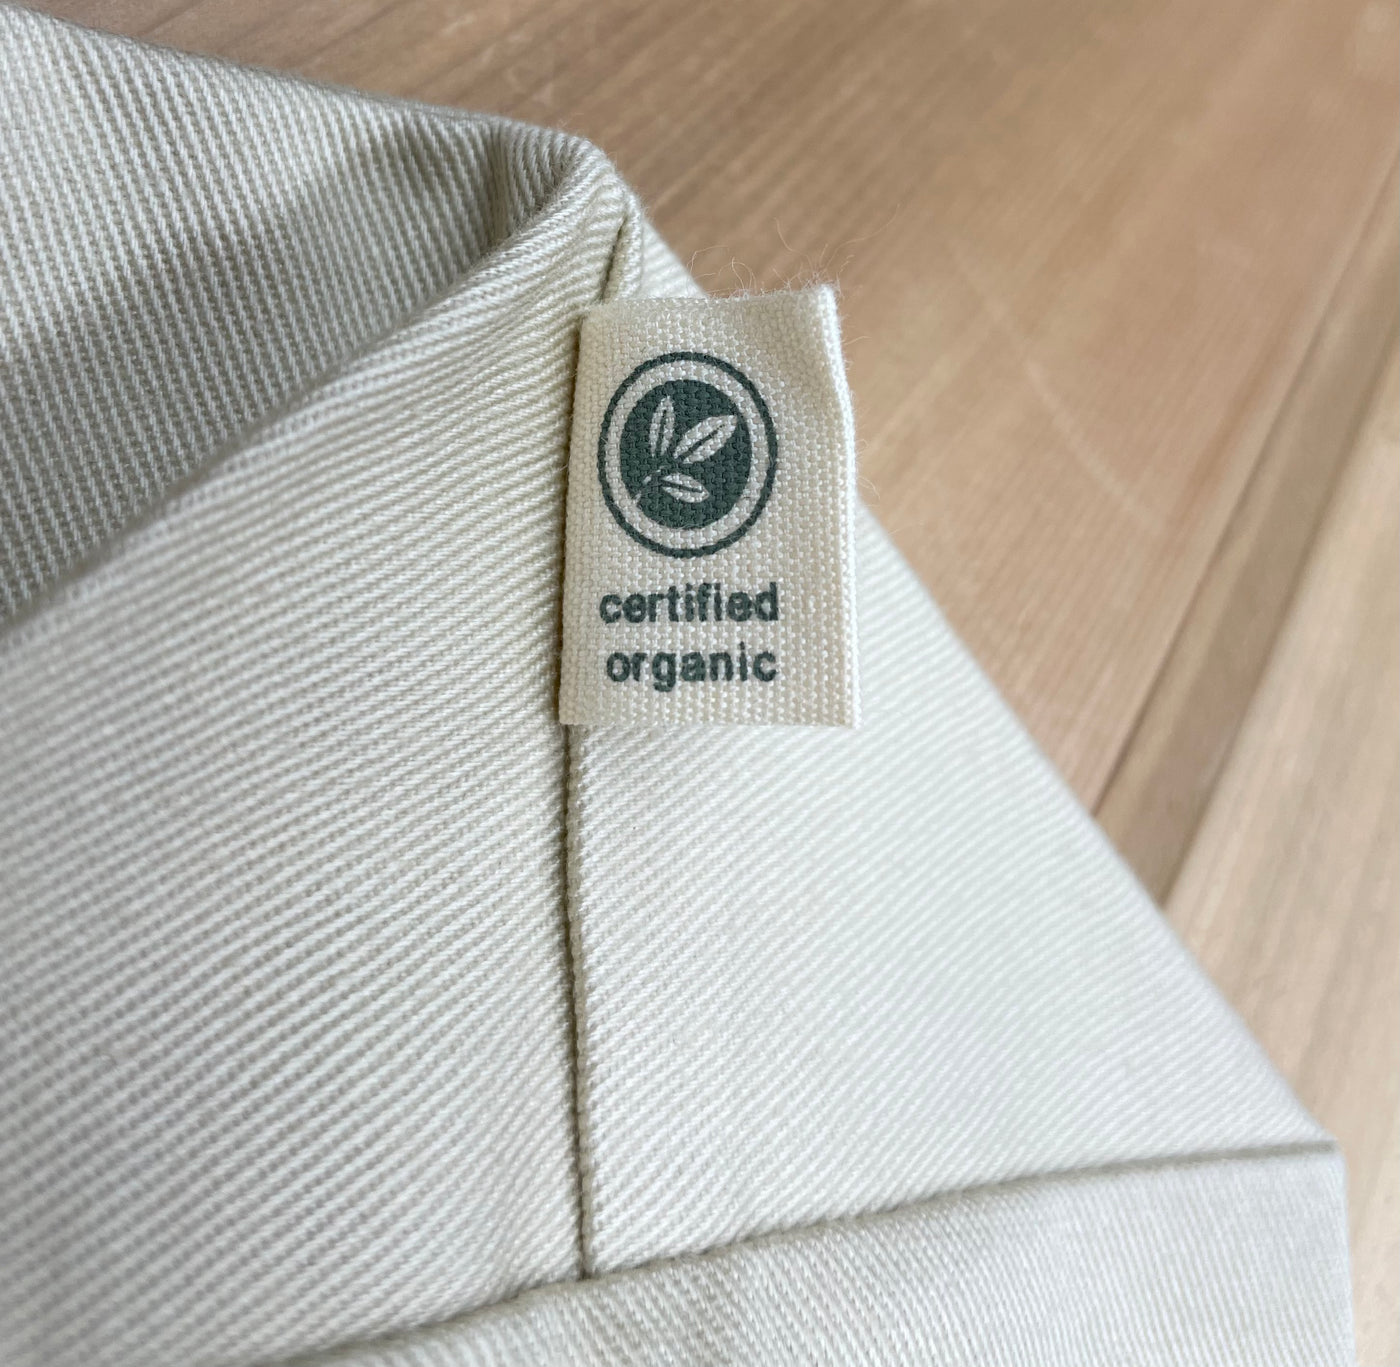 close up of organic cotton tag on the bag's bottom